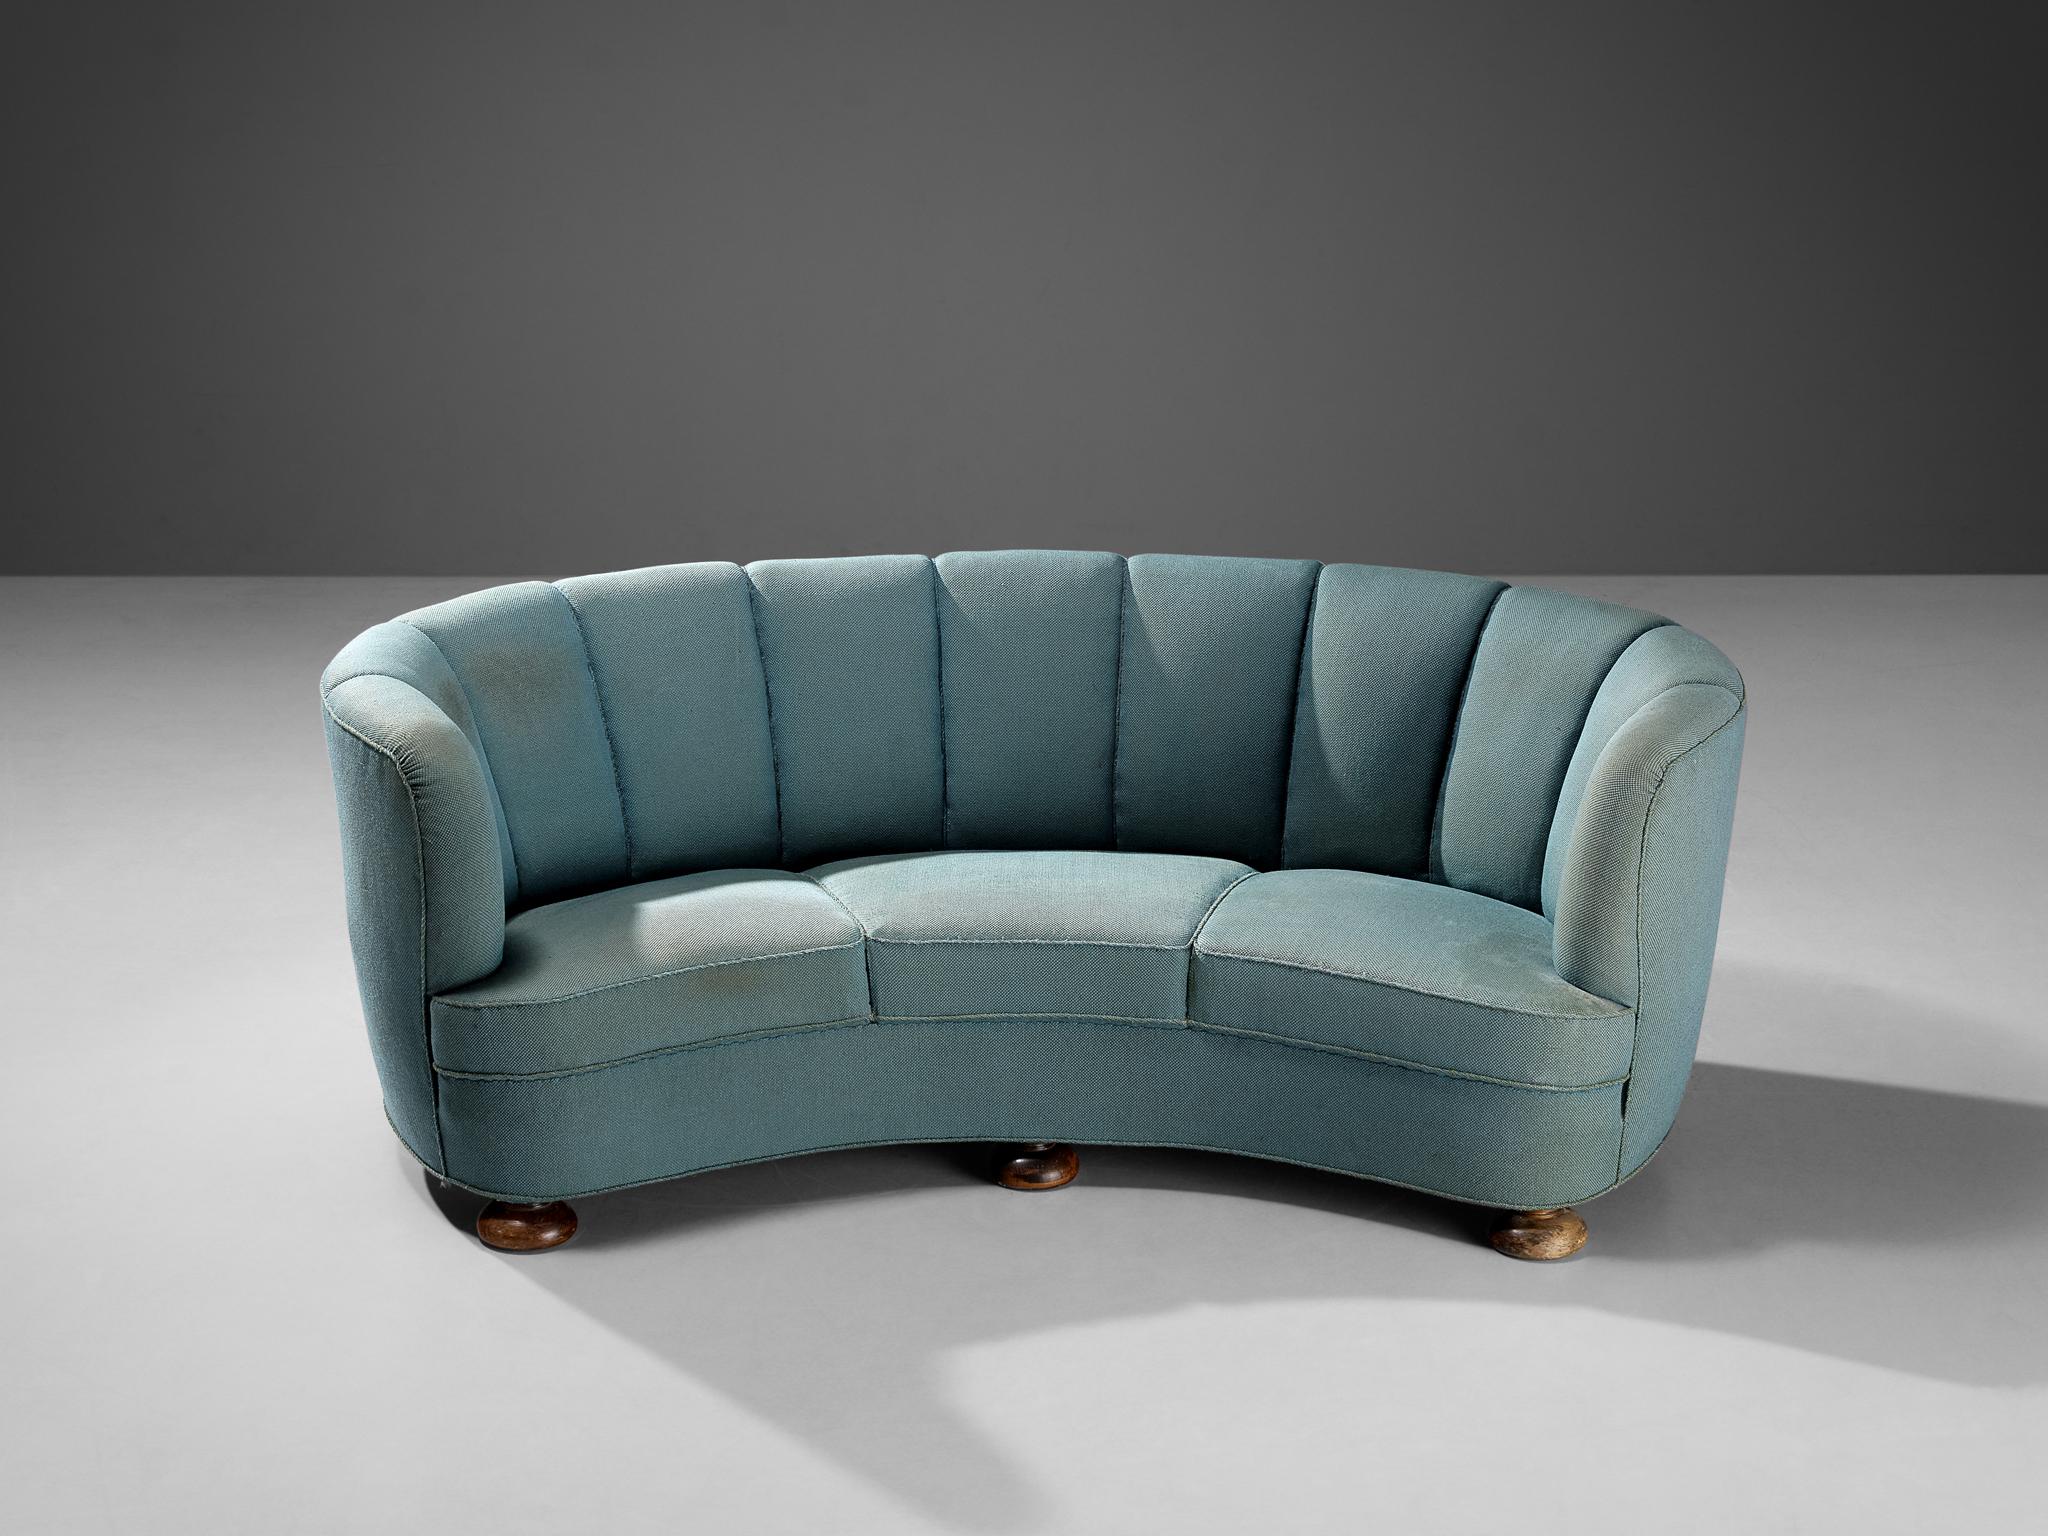 Banana sofa, fabric, stained wood, Denmark, 1940s

This voluptuous sofa is based on a solid construction of round shapes and curvaceous lines. The seating area and the backrest are organically shaped and together with the absence of strict angles,